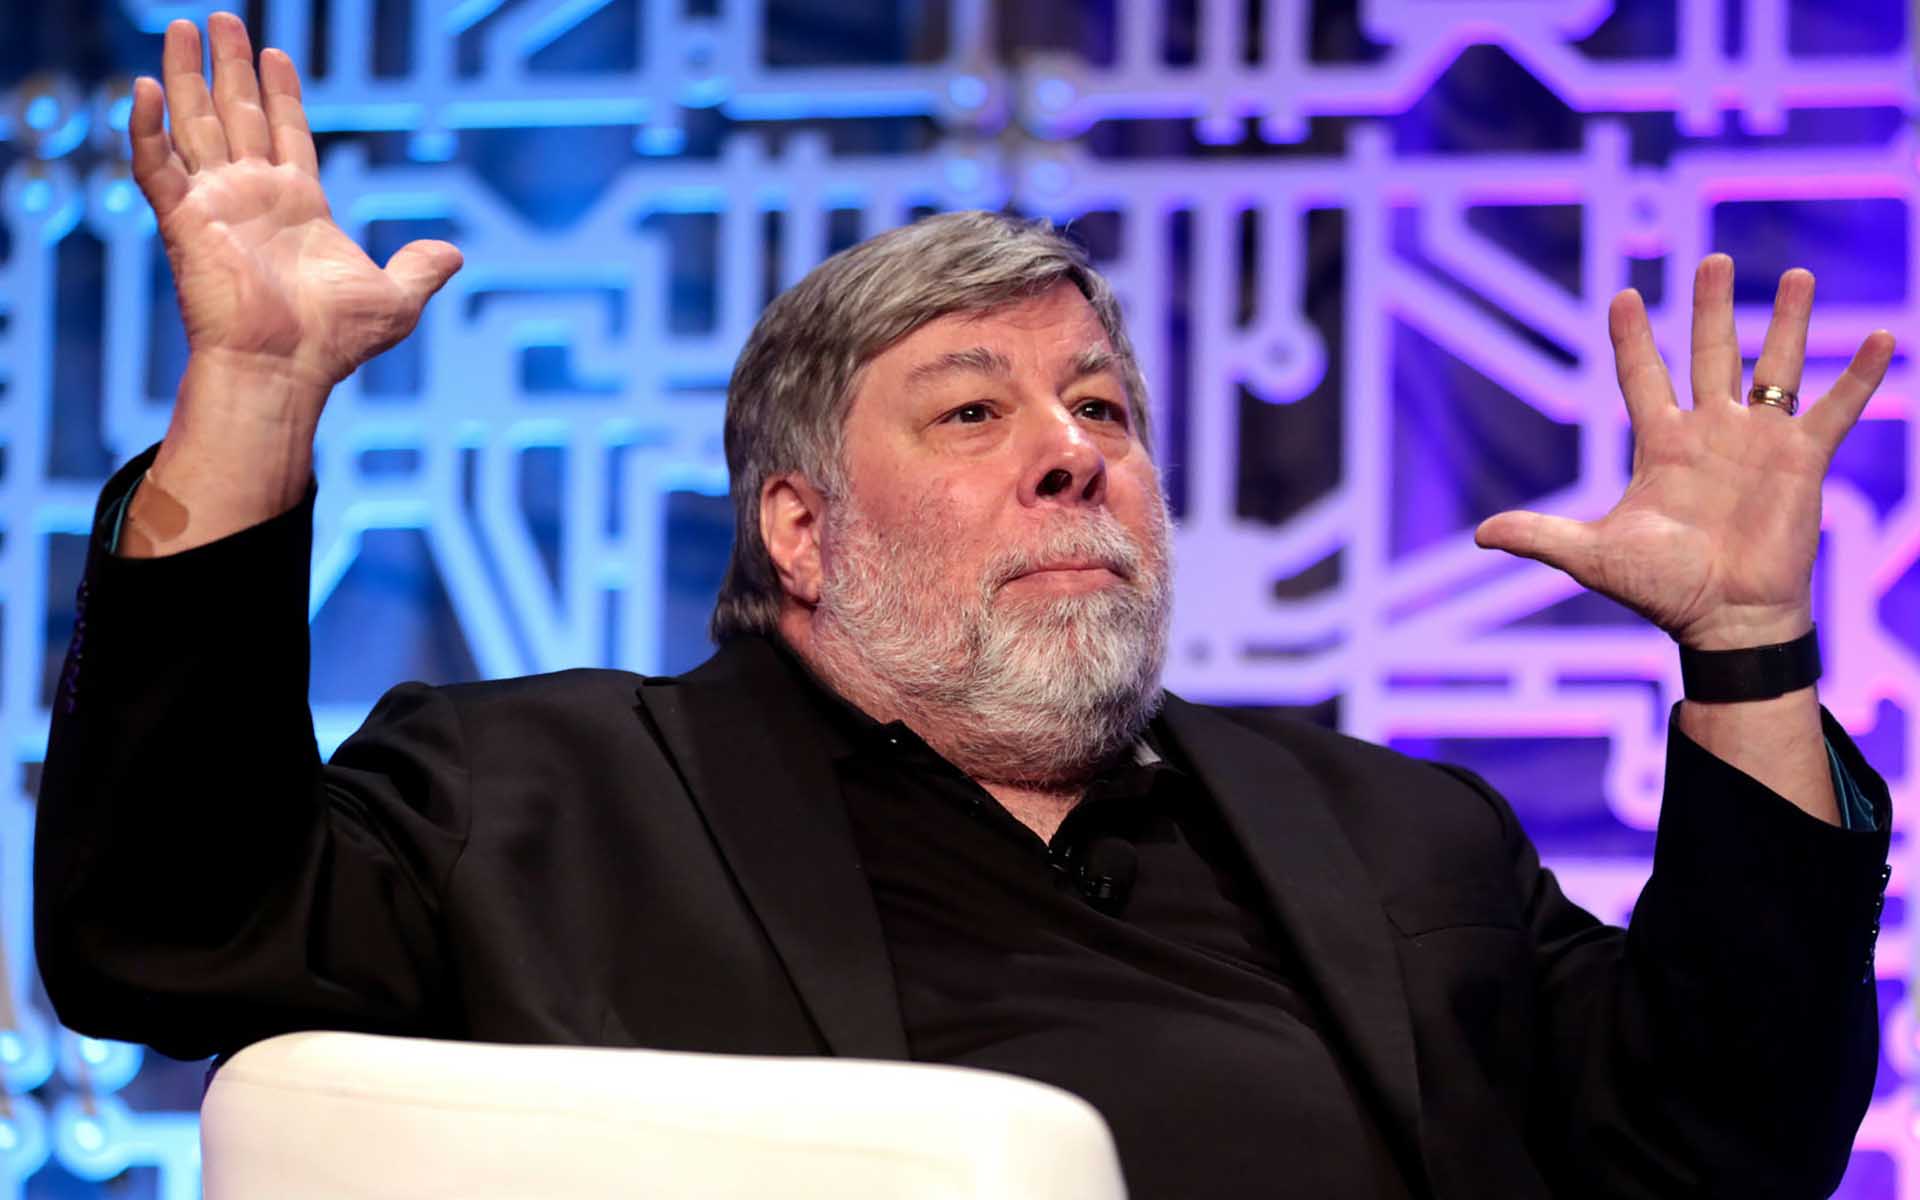 Apple’s Co-Founder Wants ‘Pure’ Bitcoin to Be the Currency of the Internet